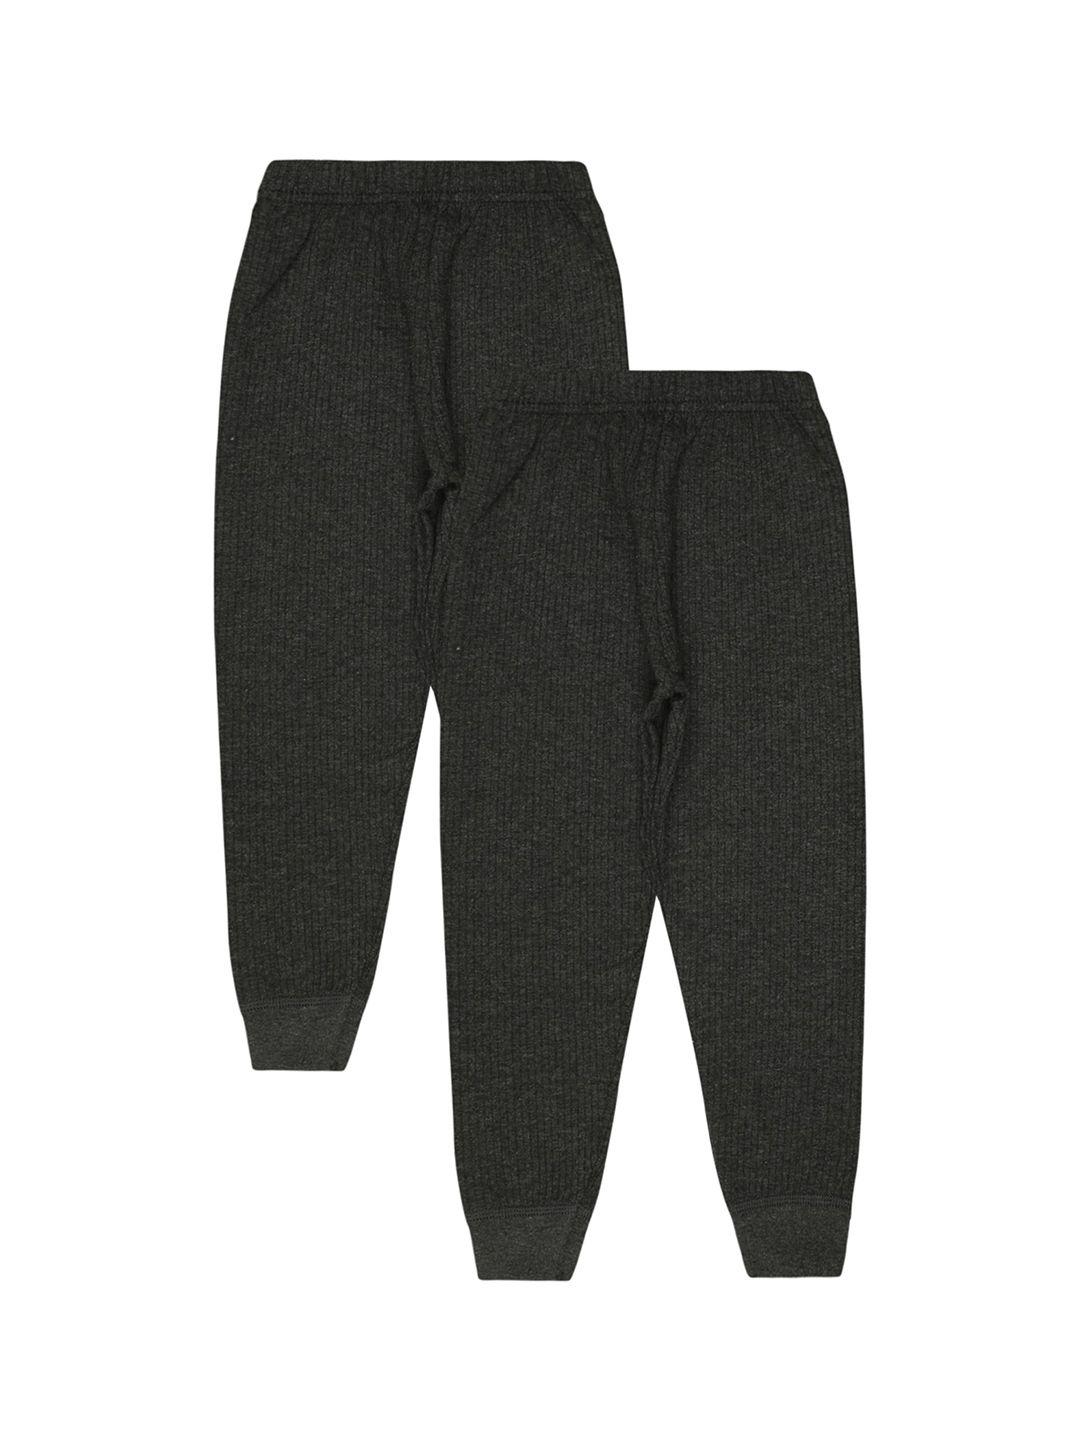 bodycare insider  infants pack of 2 mid-rise thermal bottoms